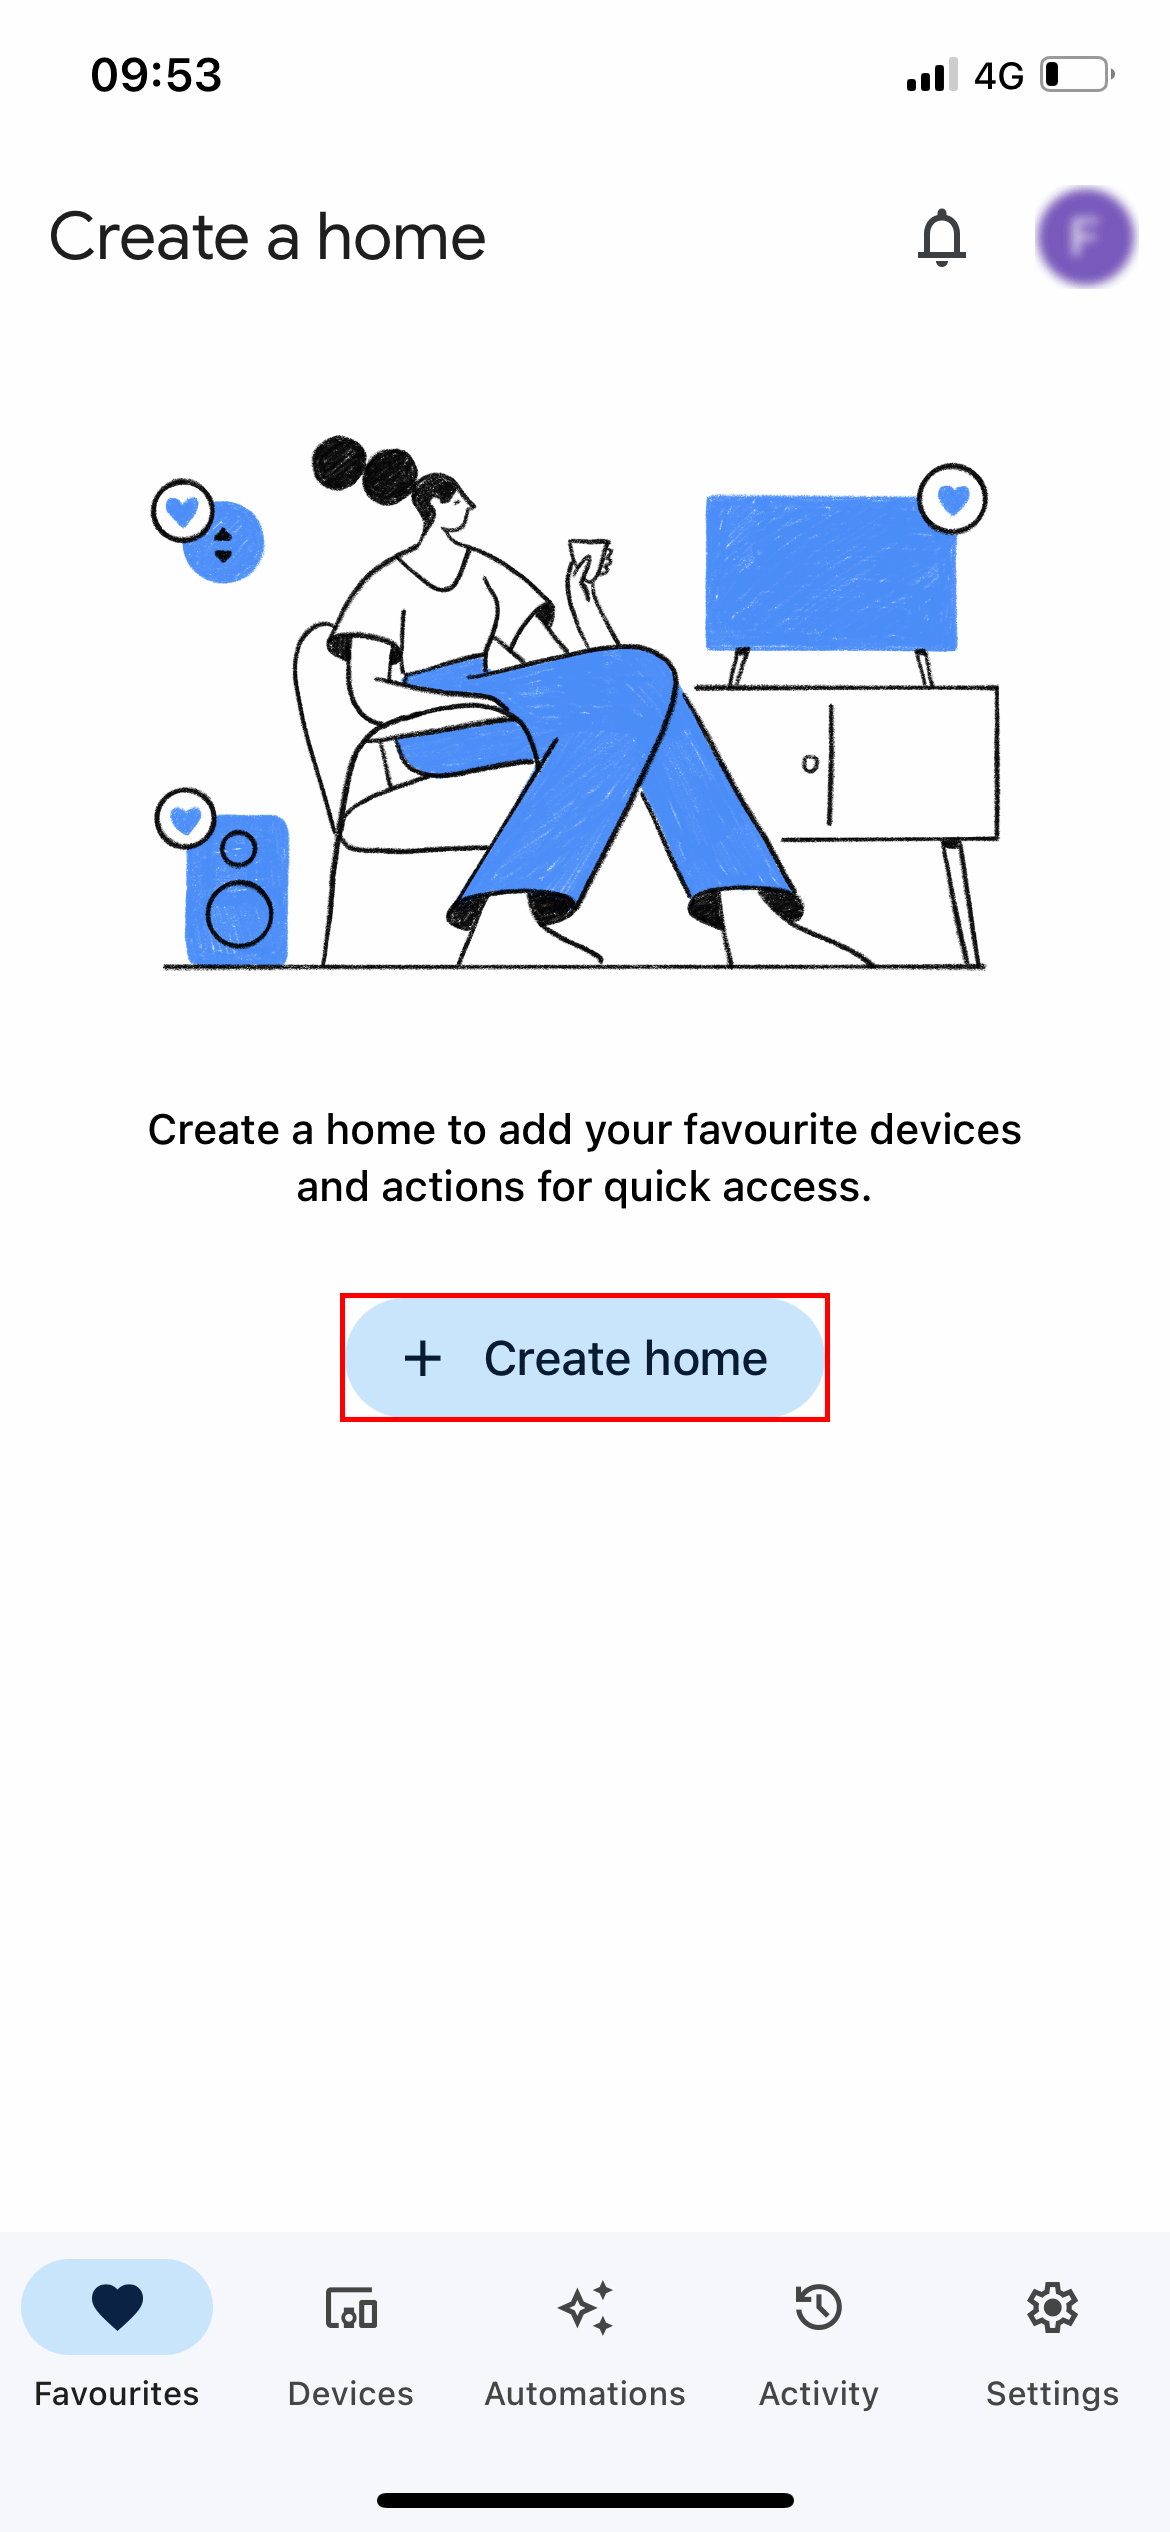 How to create a new home in Google home app in order to integrate the ilevia's server